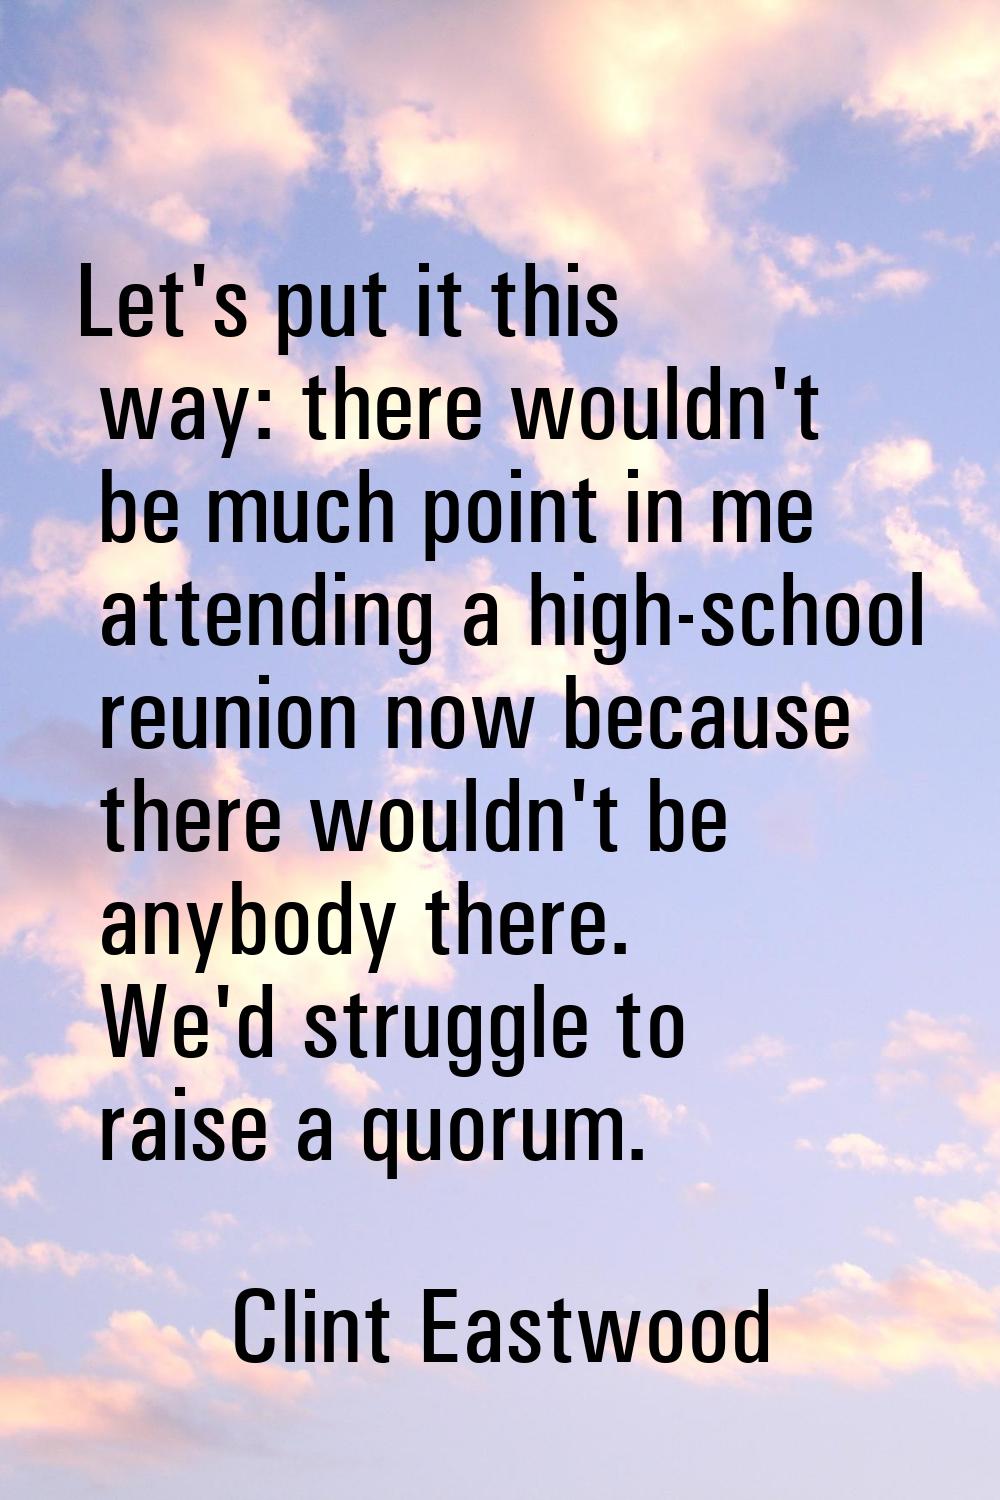 Let's put it this way: there wouldn't be much point in me attending a high-school reunion now becau